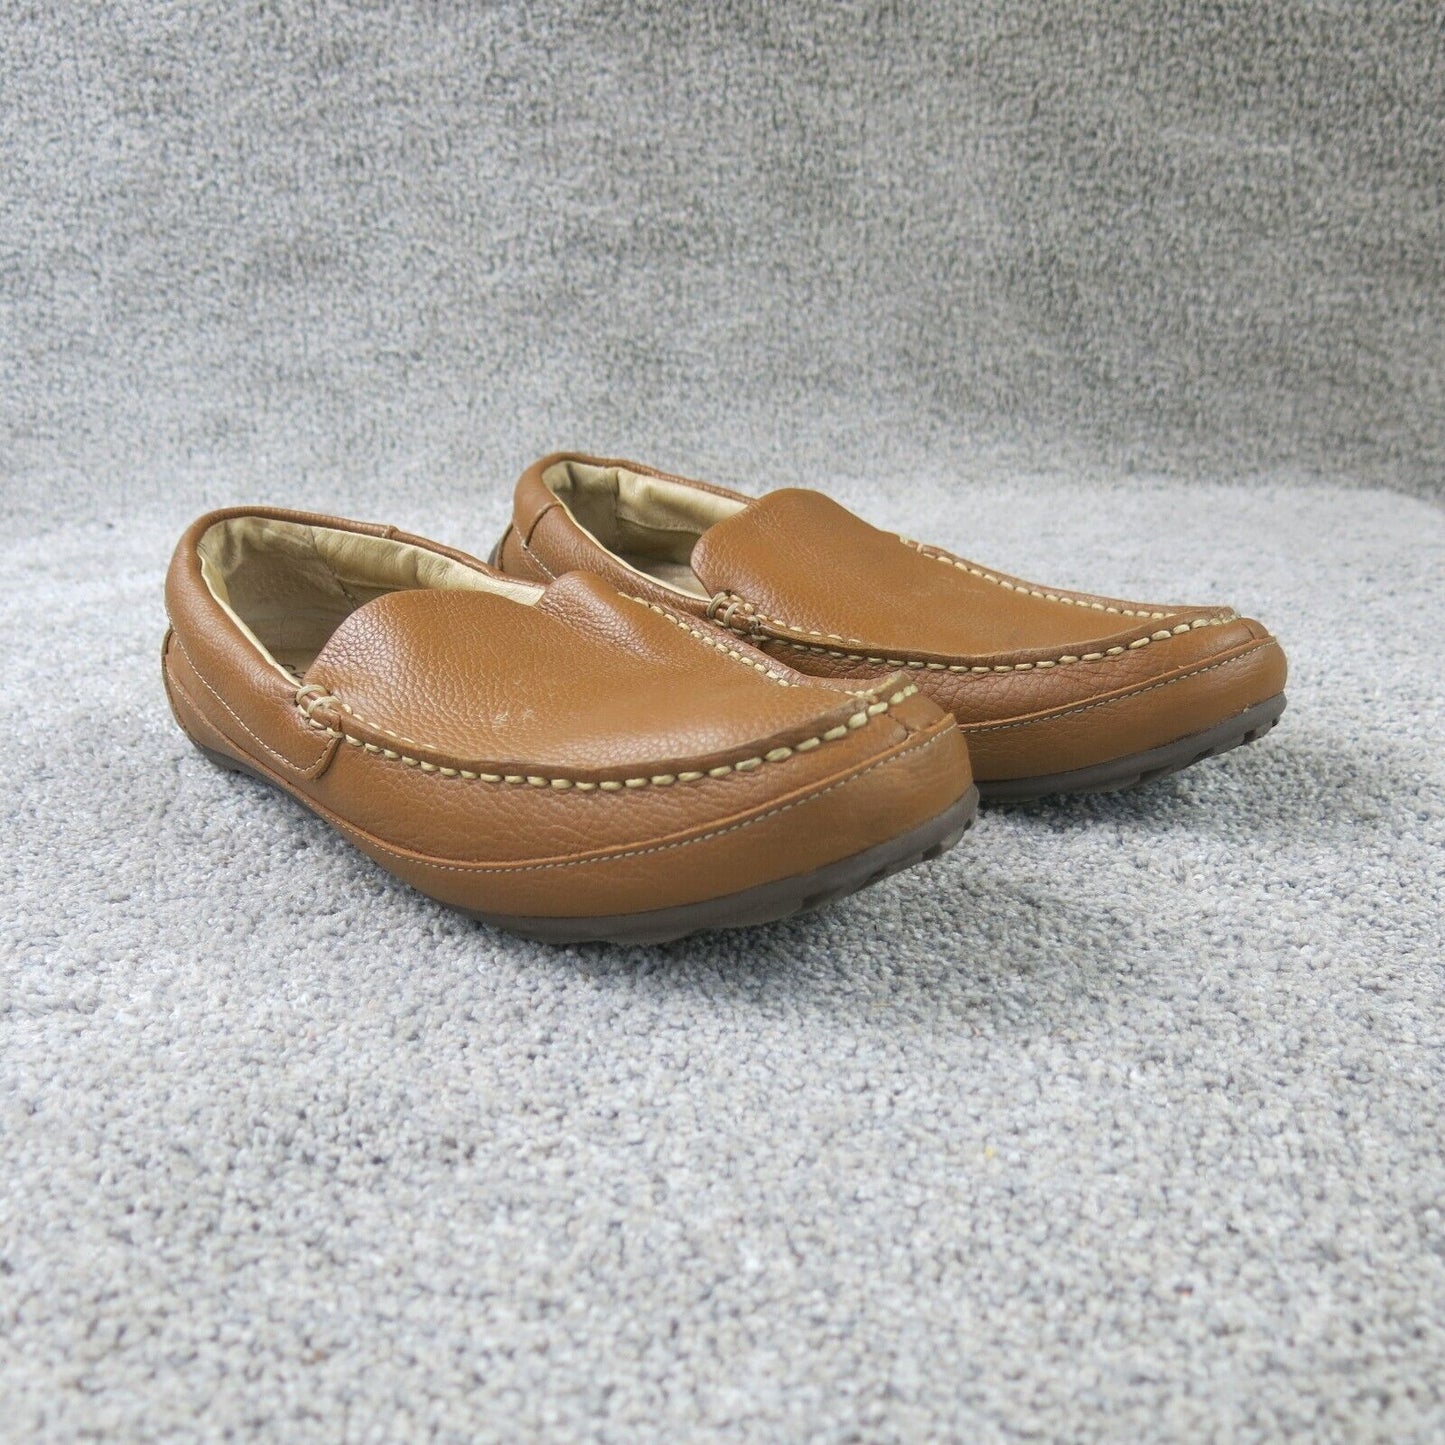 Sperry Shoes Top Sider STS 10724 Men Hampden Venetian Loafer Leather Brown 11.5M